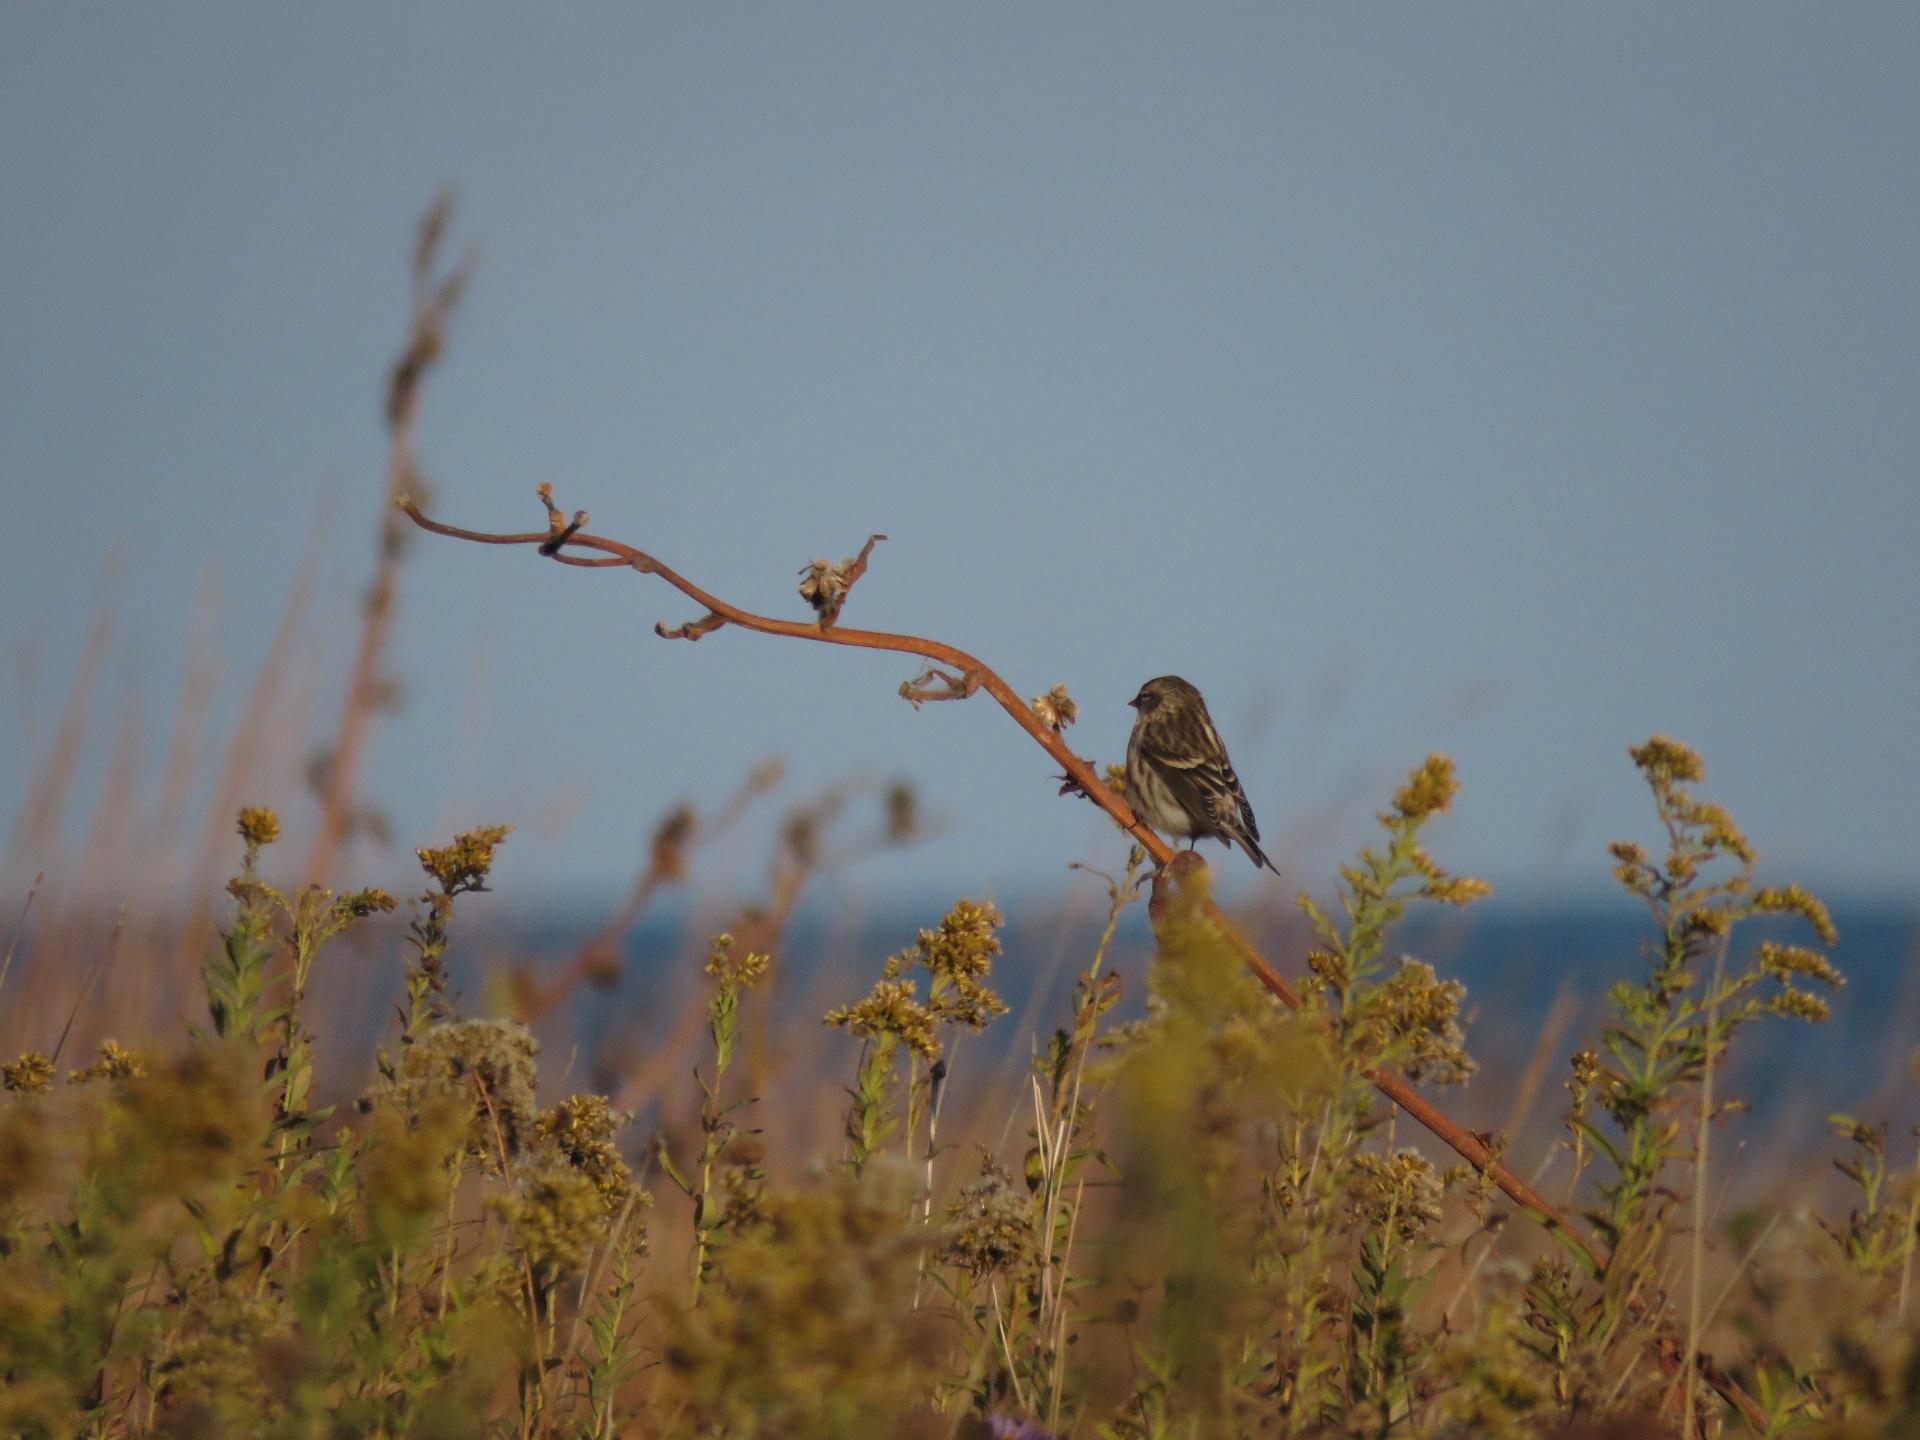 Pictured is a common redpoll, which is the 282nd bird species Isoo O’Brien spotted this year. (Credit: Isoo O’Brien)